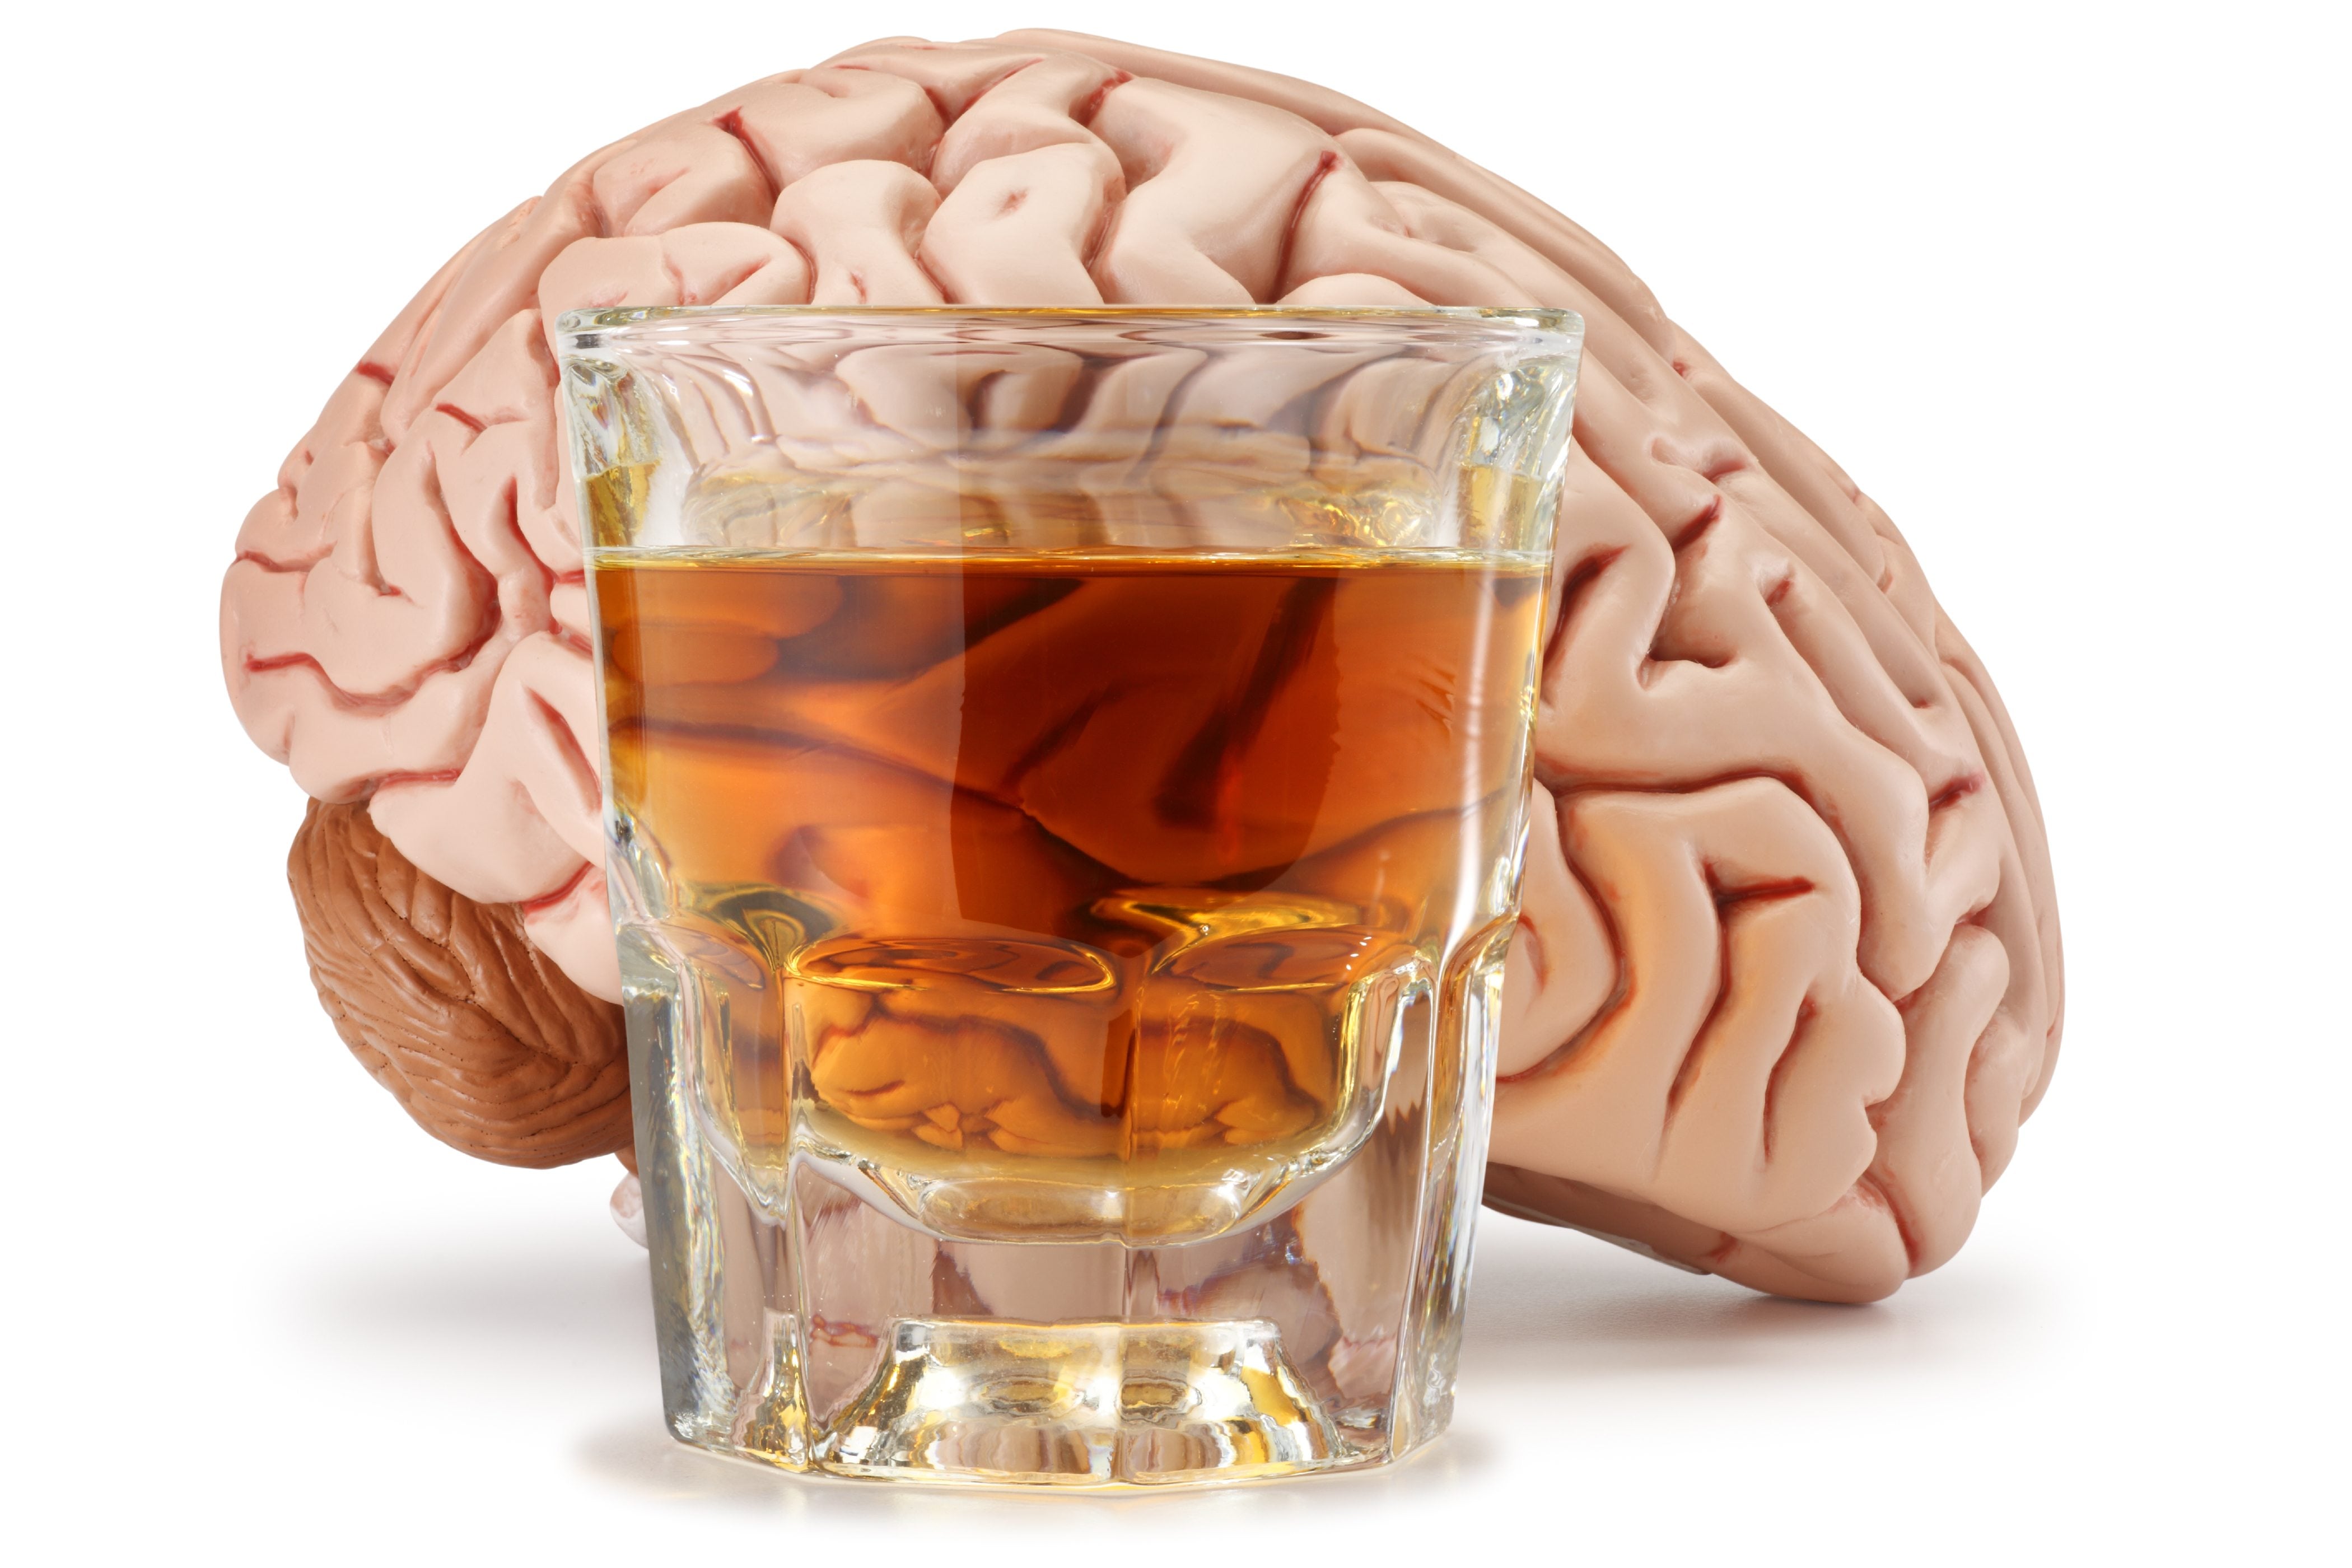 Researchers at Oregon Health &amp; Science University seek to understand how alcohol&#039;s impacts on the brain can determine who is at risk for alcohol addiction.